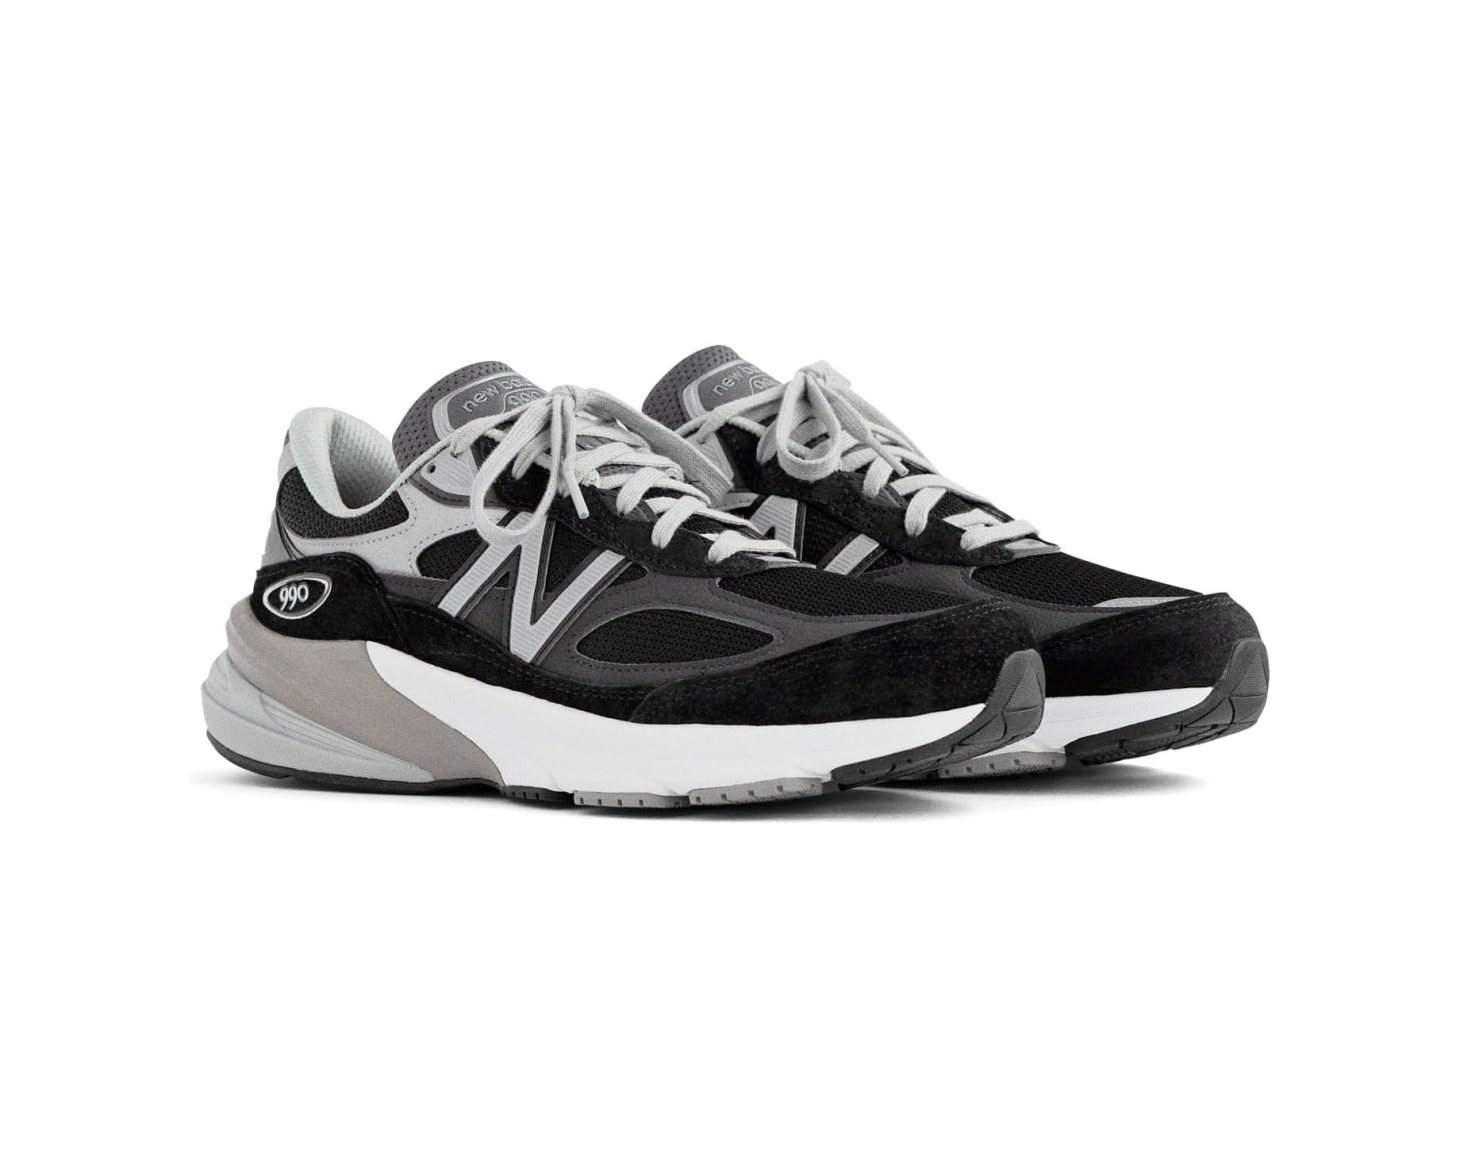 new balance classics 990v6, one of the best black sneakers for women